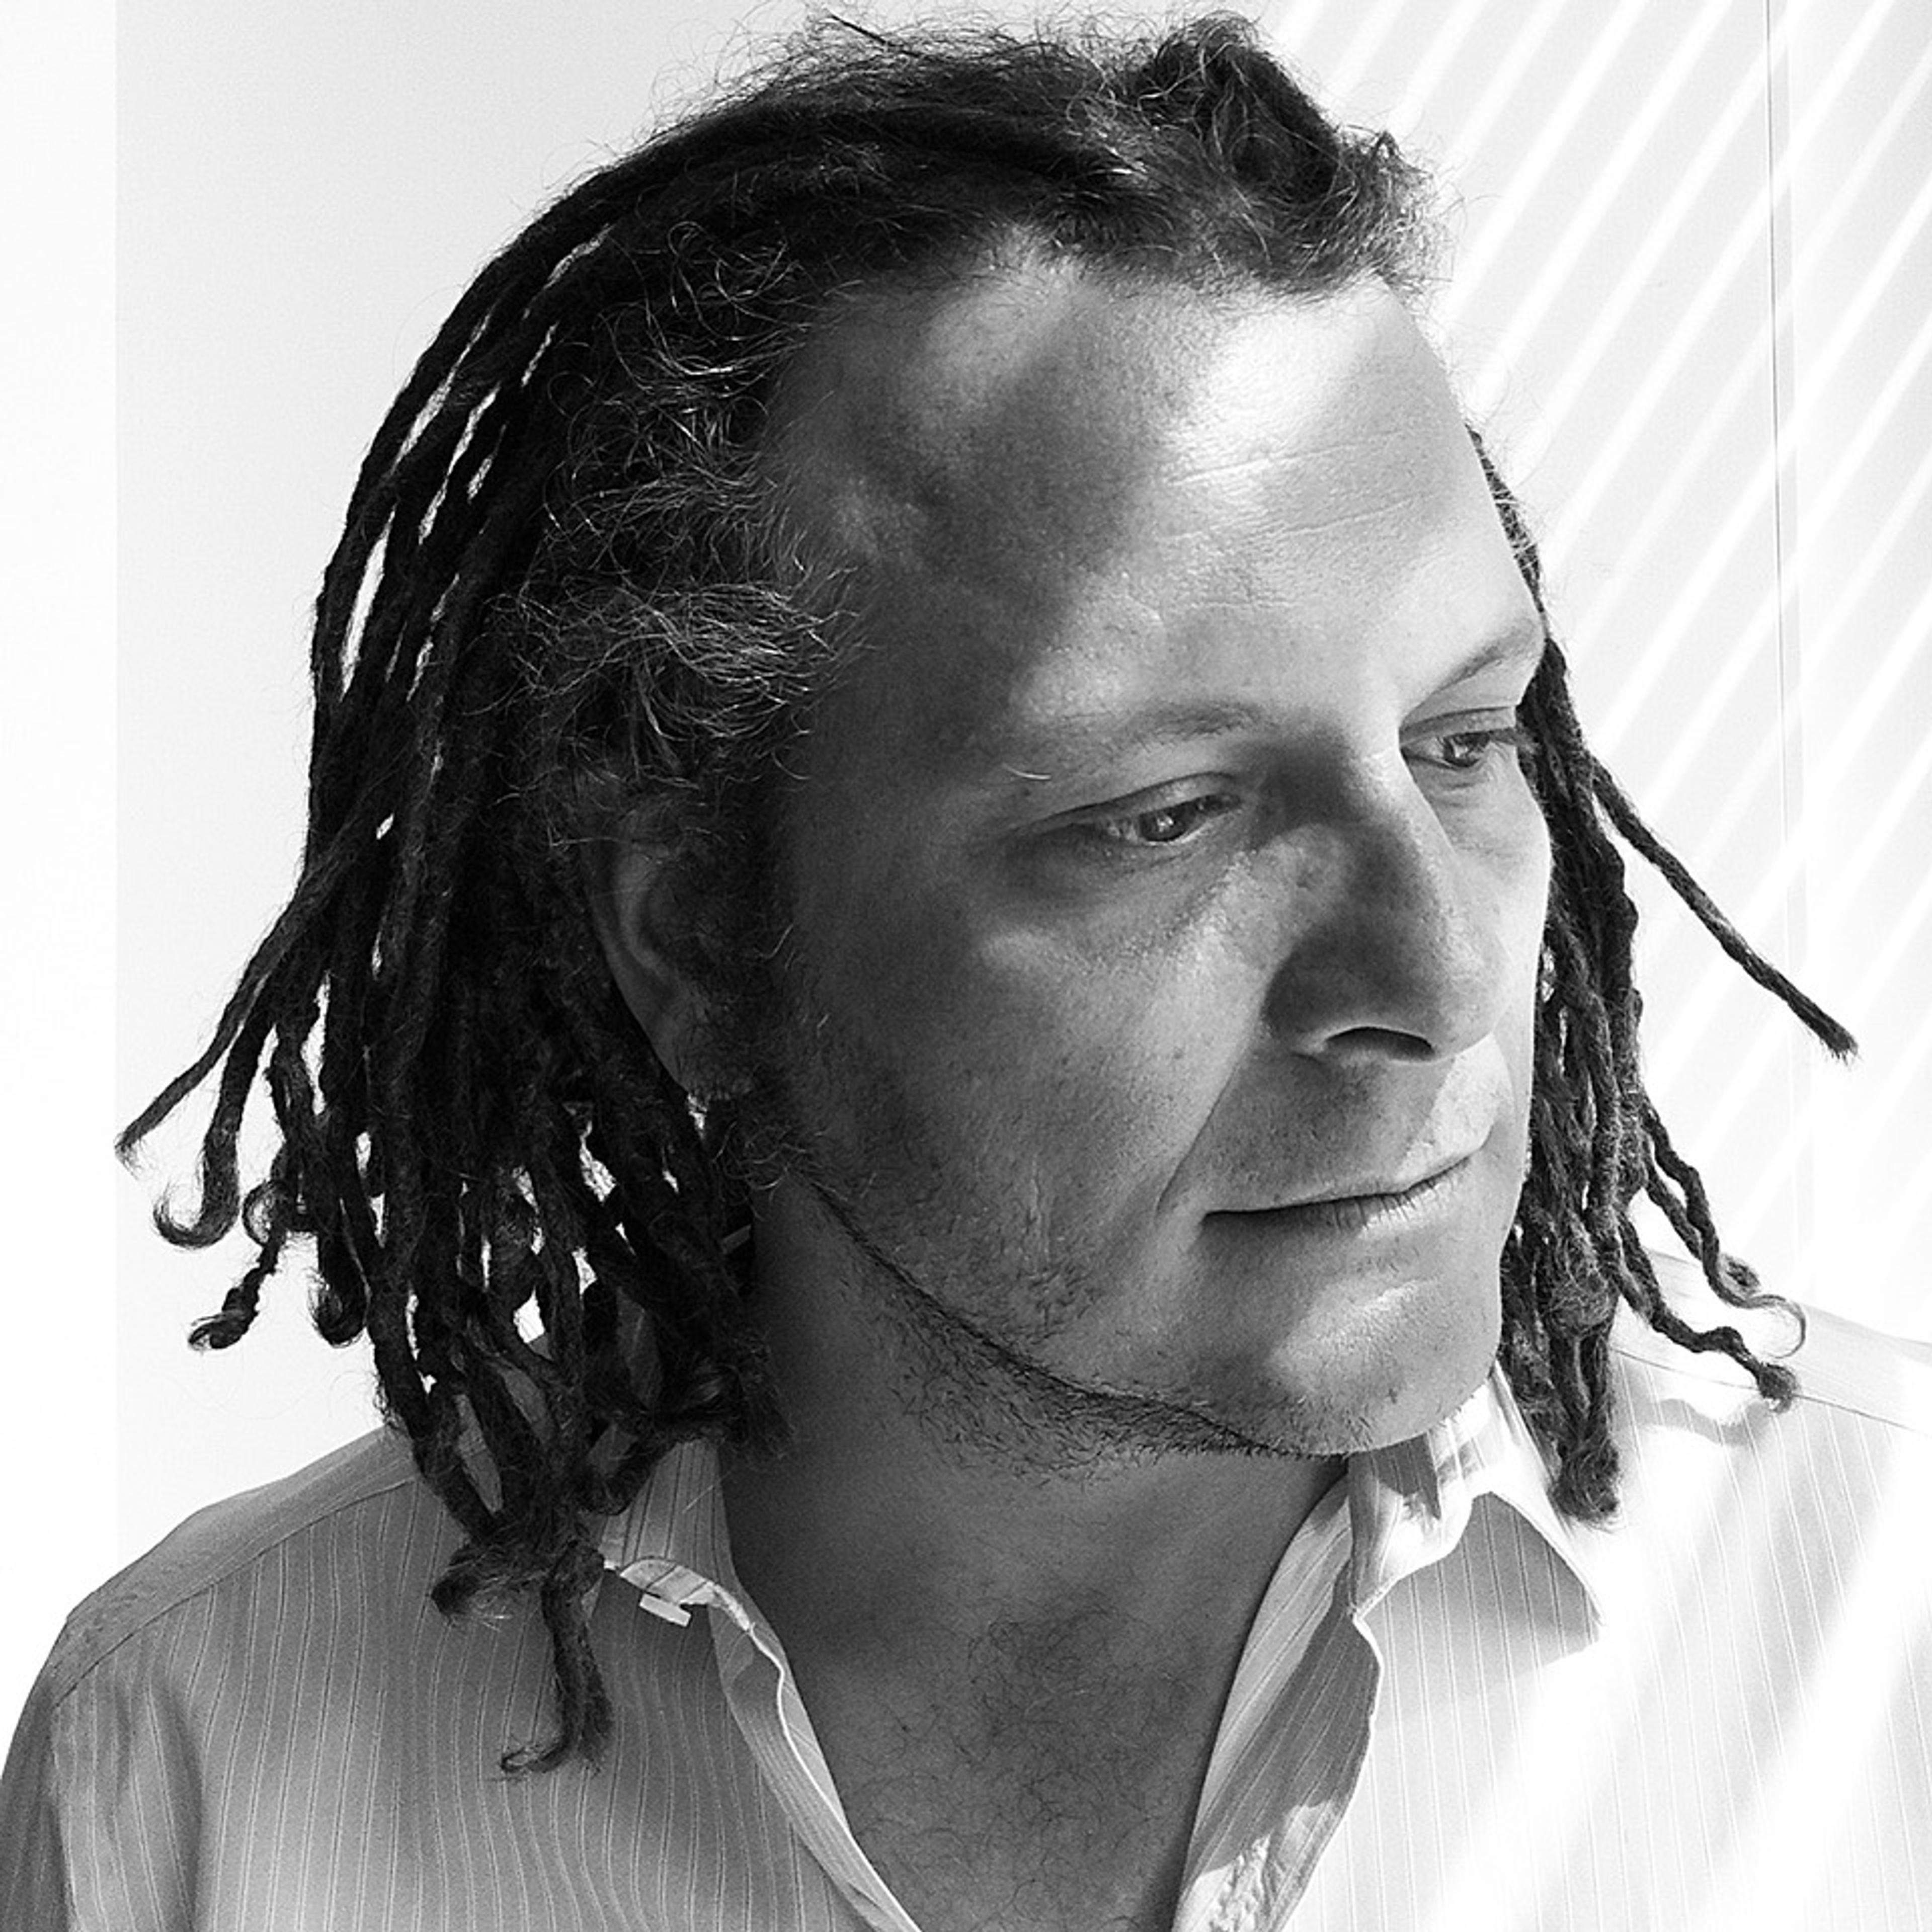 A black and white photograph of a man with short dreadlocks wearing a dress shirt